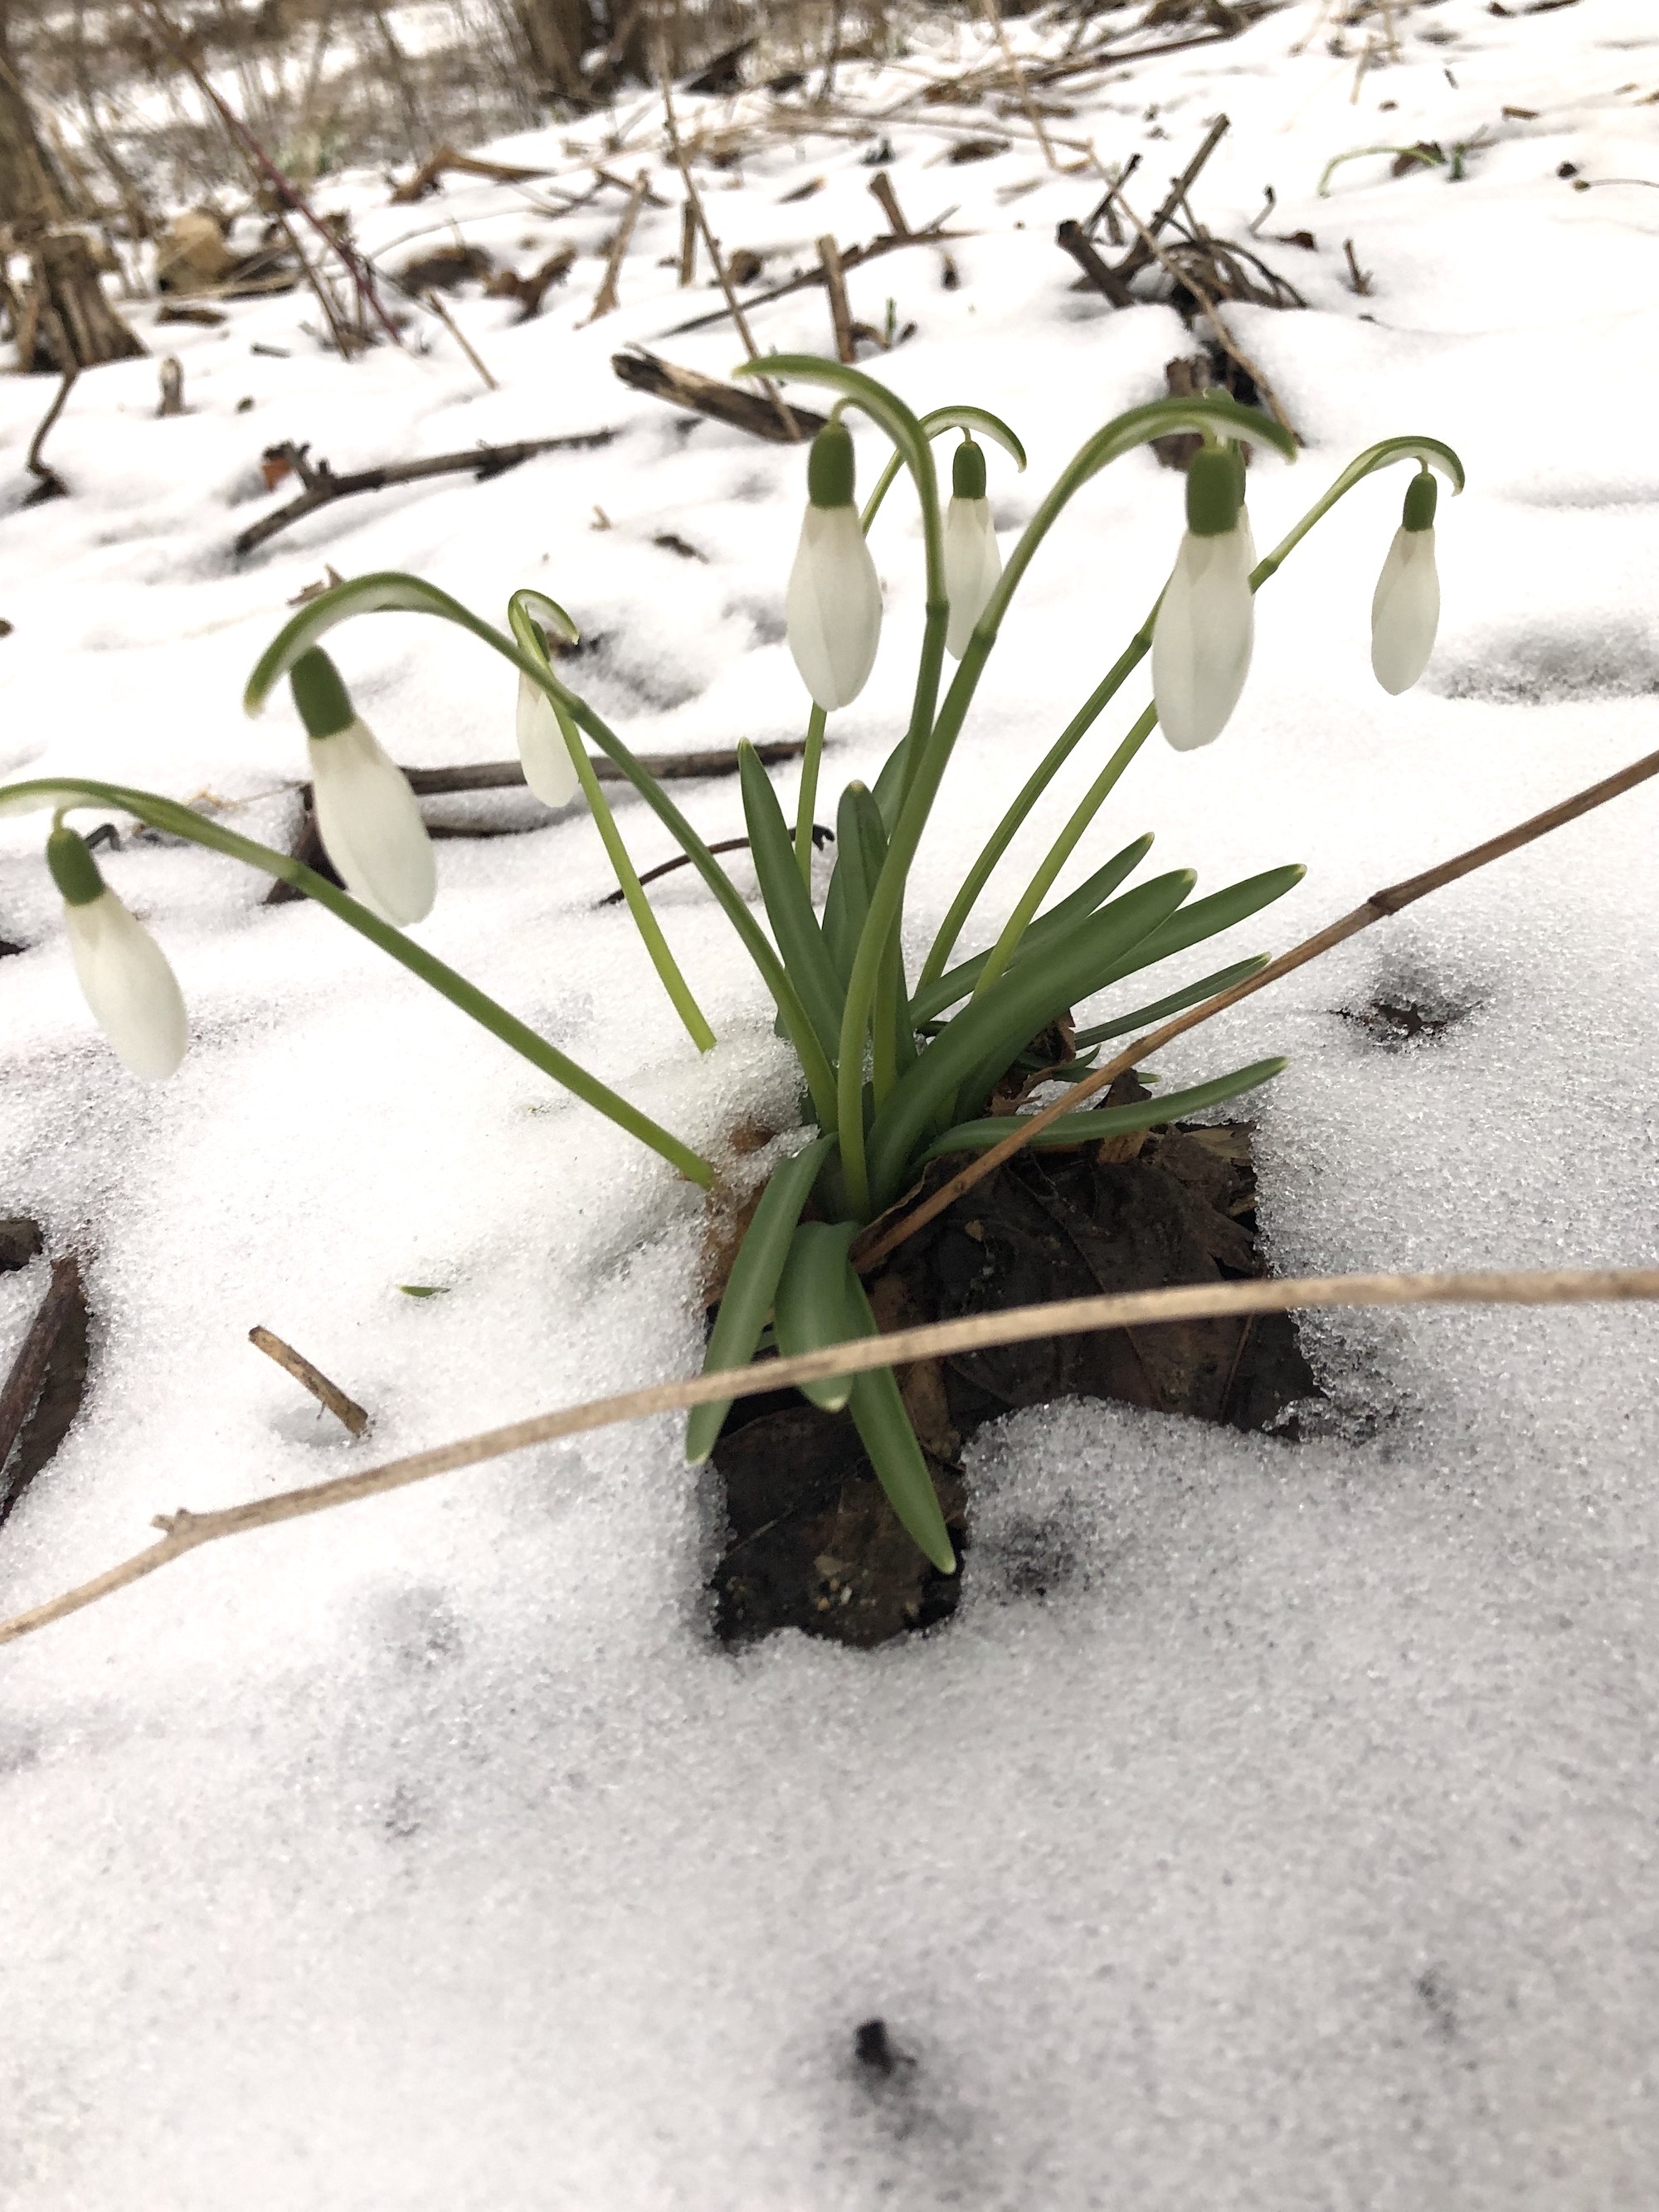 Snowdrops emerging in Madison Wisconsin along Arbor Drive on March 17, 2021.